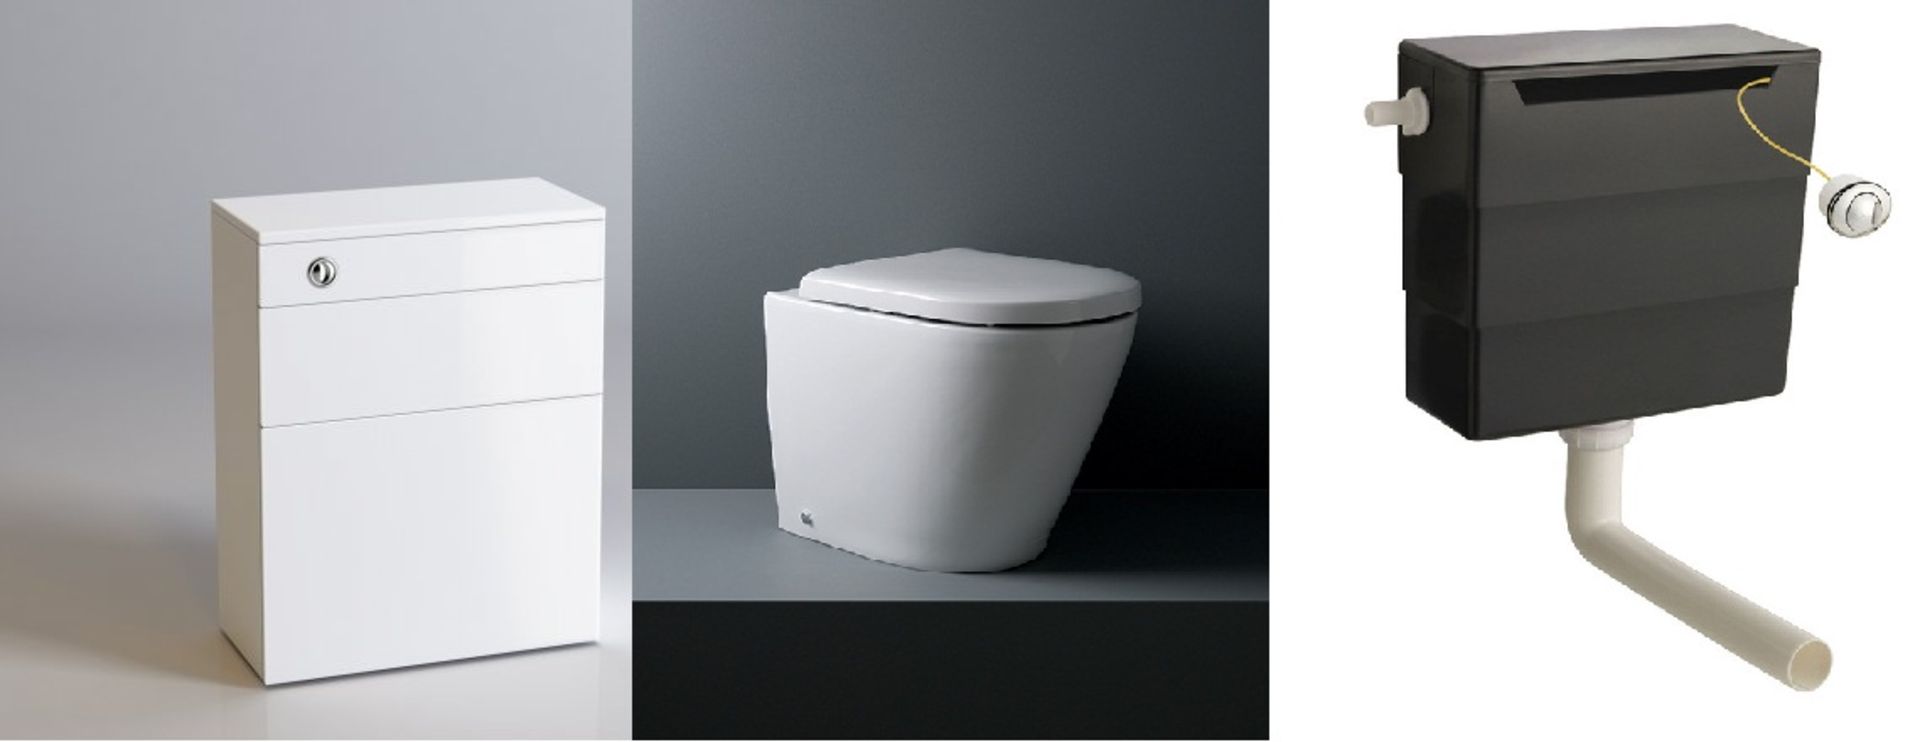 Atlanta Back To Wall WC Pan, White Ceramic 385x375x545mm with concealed dual flush push button ciste